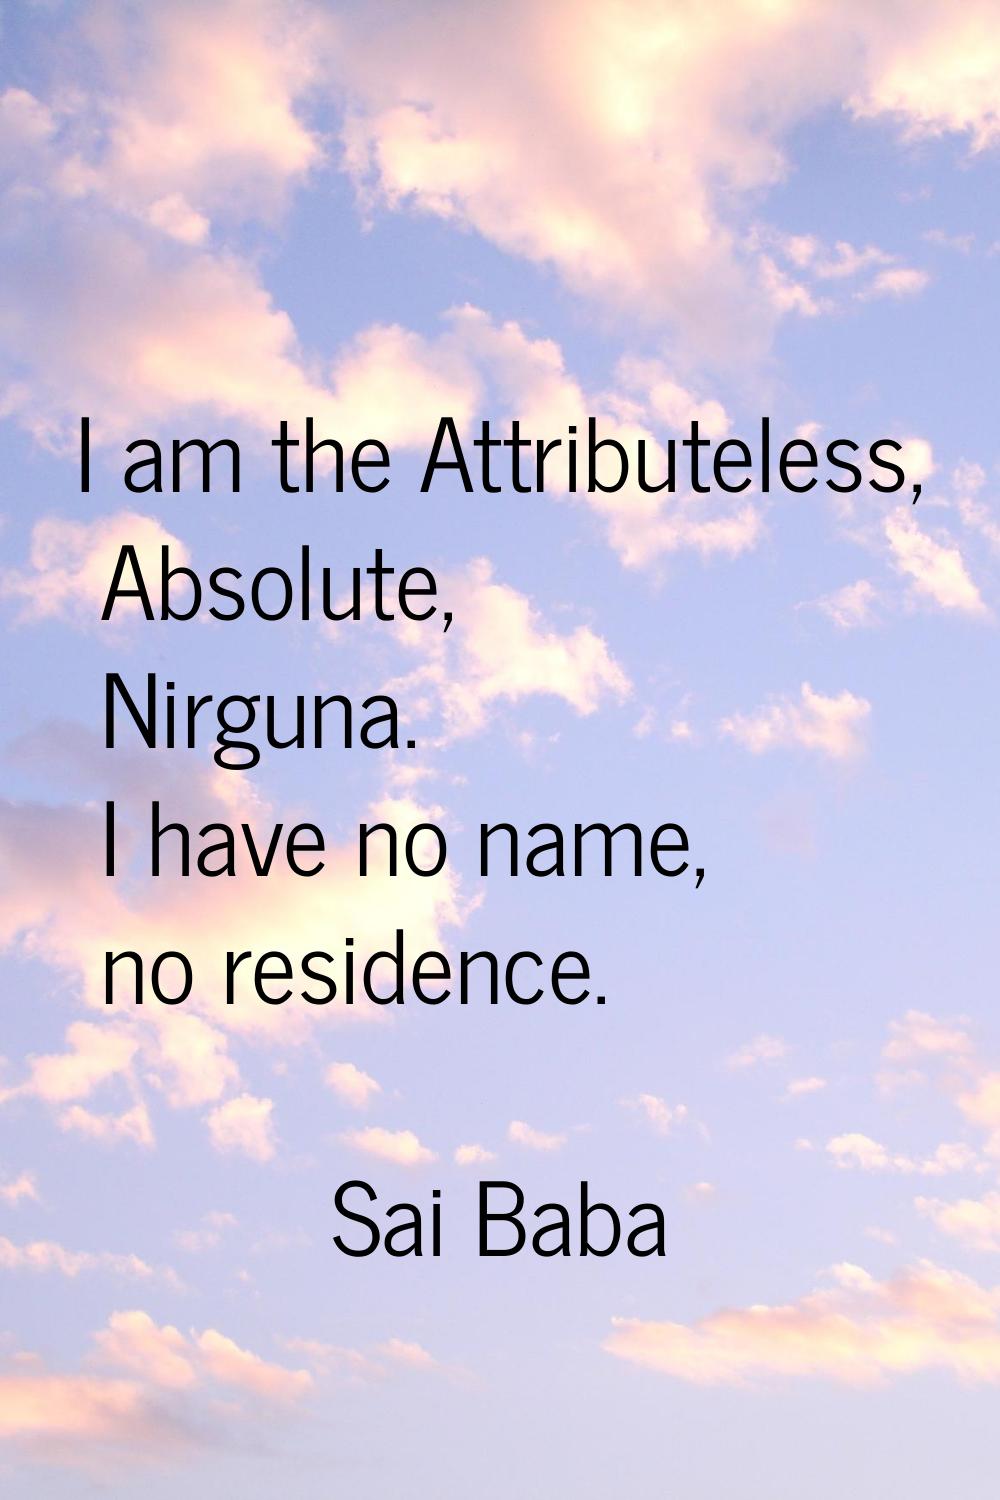 I am the Attributeless, Absolute, Nirguna. I have no name, no residence.